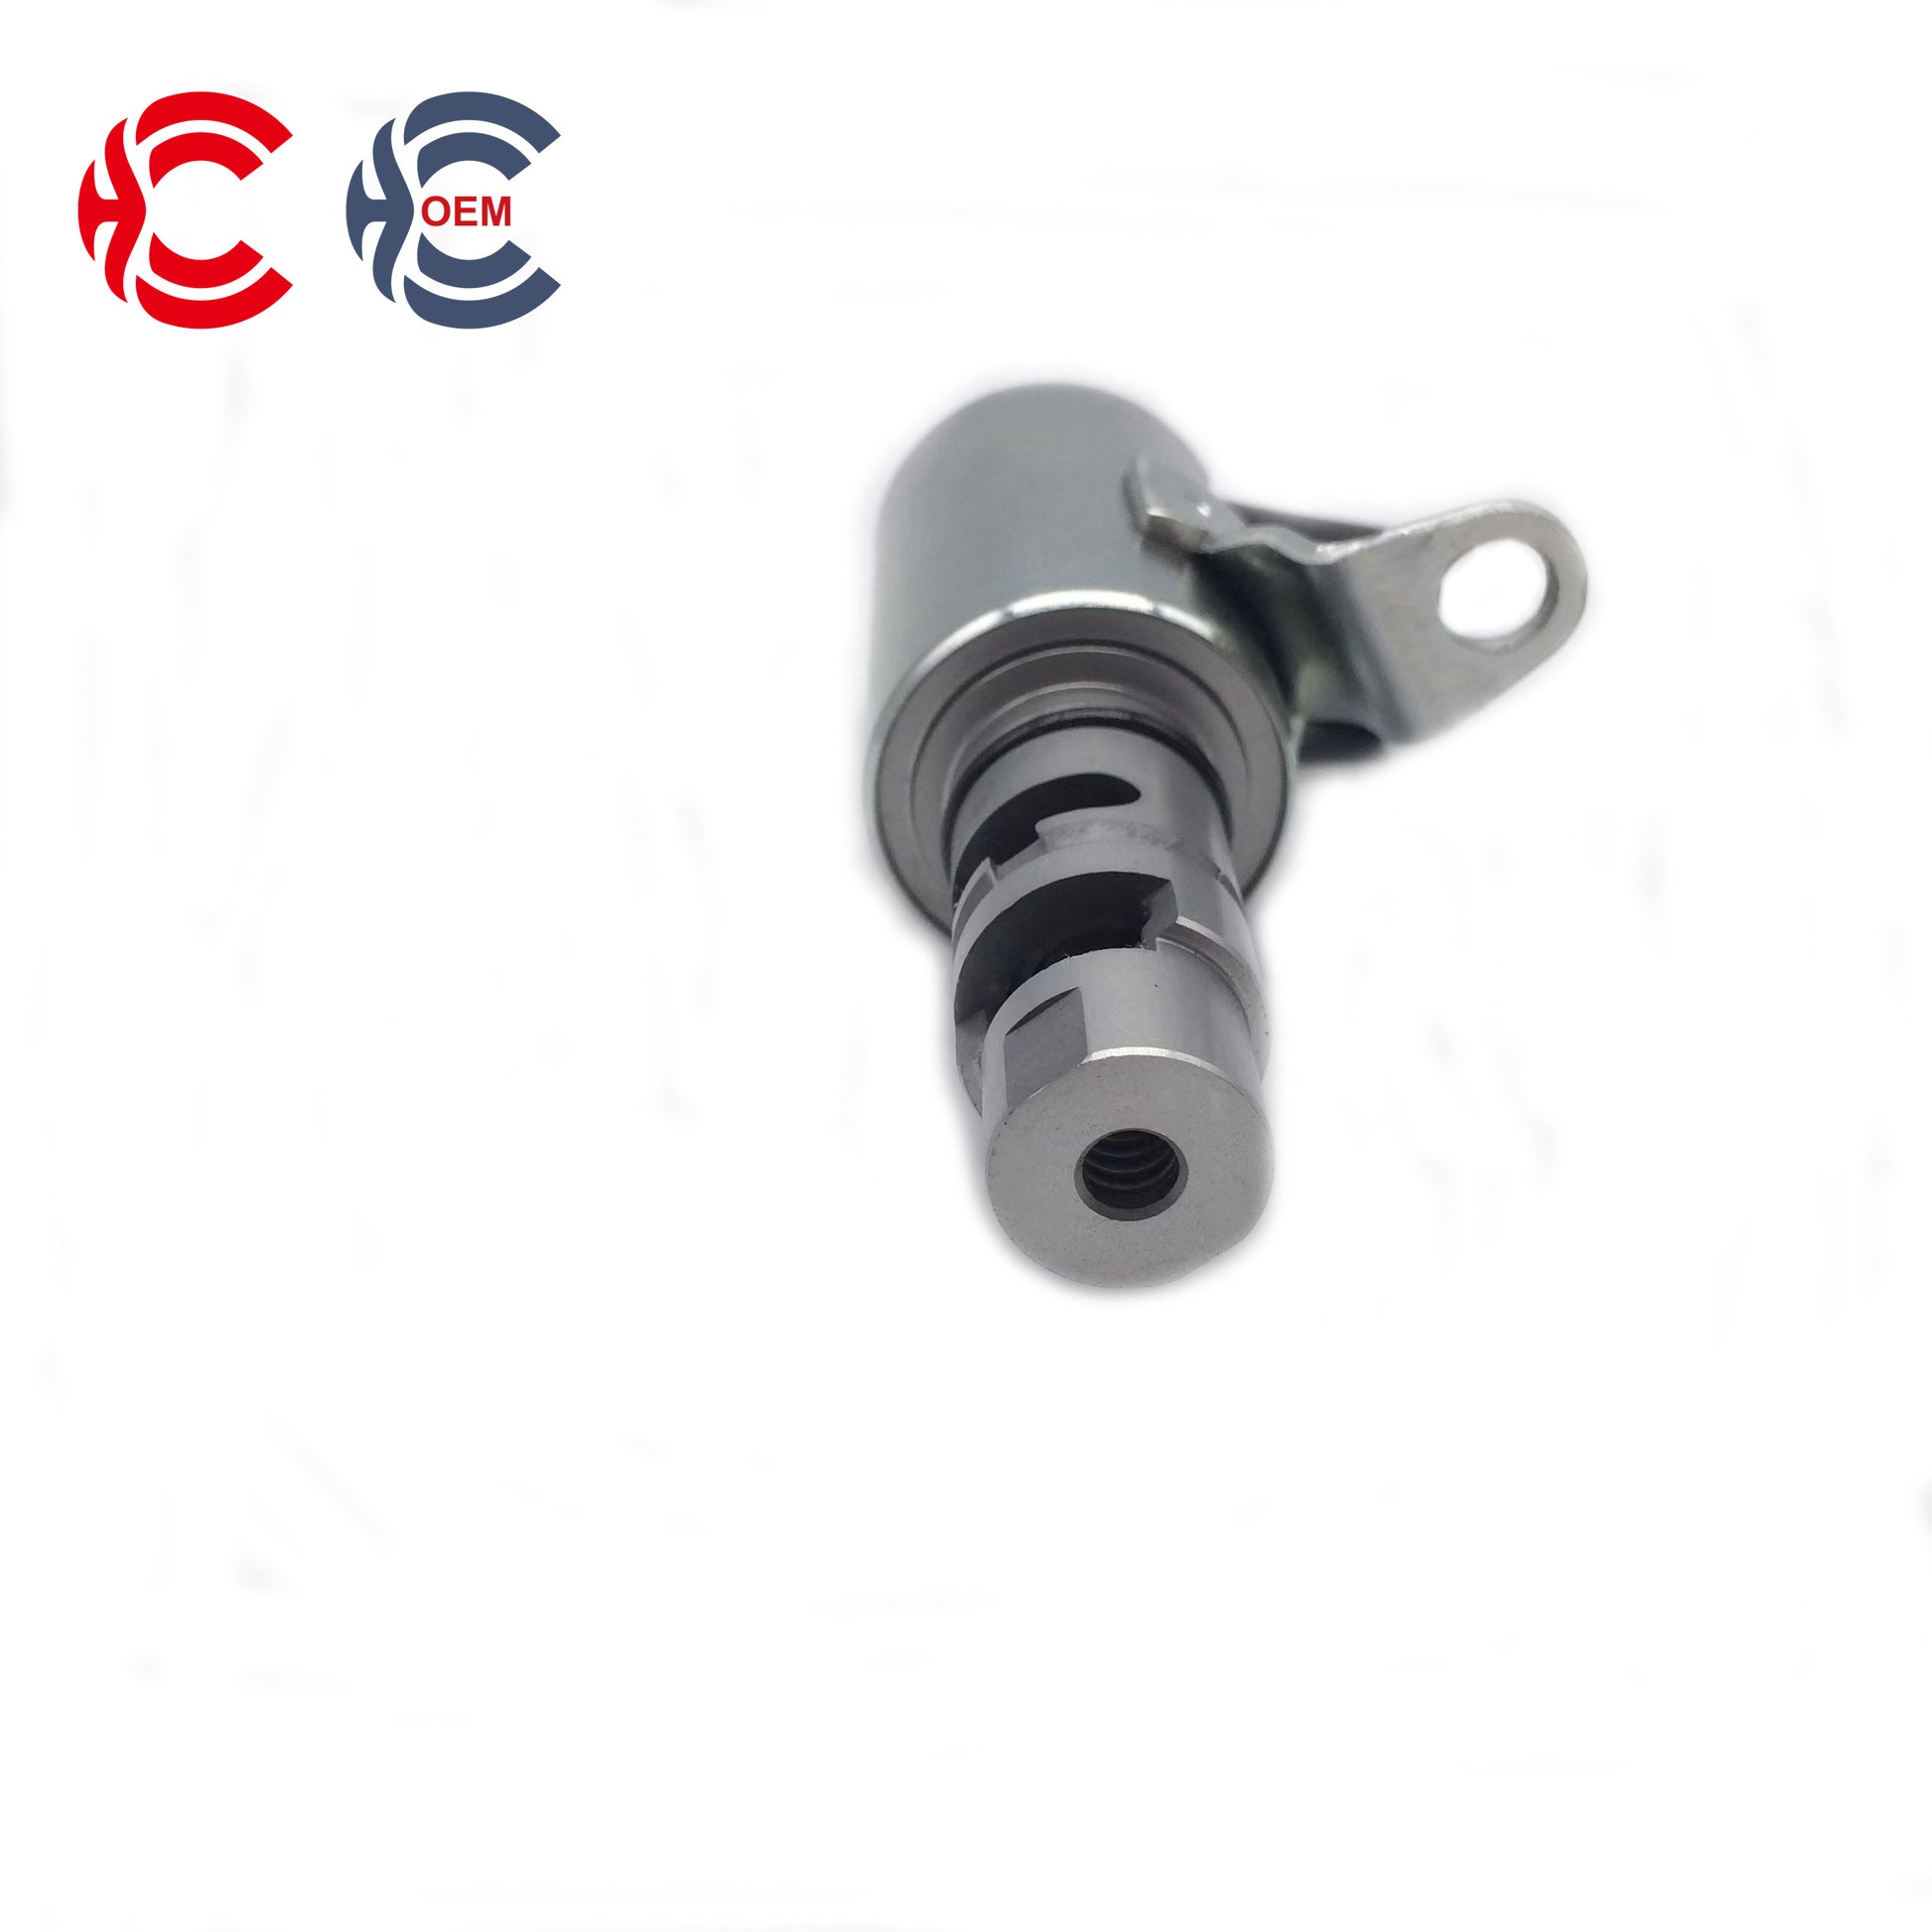 OEM: MN137240Material: ABS metalColor: black silverOrigin: Made in ChinaWeight: 300gPacking List: 1* VVT Solenoid Valve More ServiceWe can provide OEM Manufacturing serviceWe can Be your one-step solution for Auto PartsWe can provide technical scheme for you Feel Free to Contact Us, We will get back to you as soon as possible.